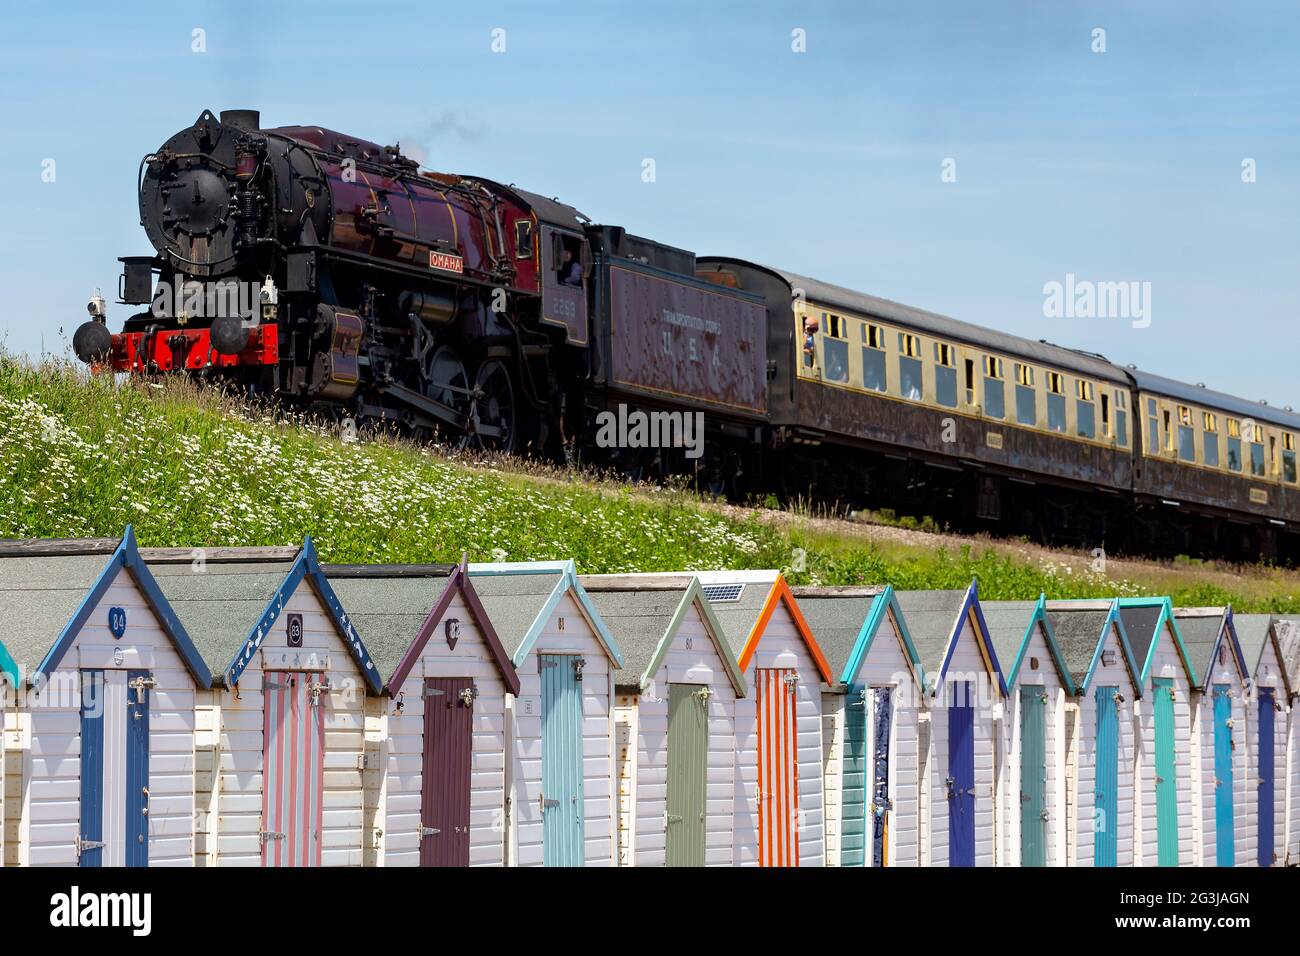 The Omaha steam train pictured travelling past the colourful beach huts in Goodrington, devon, UK Stock Photo